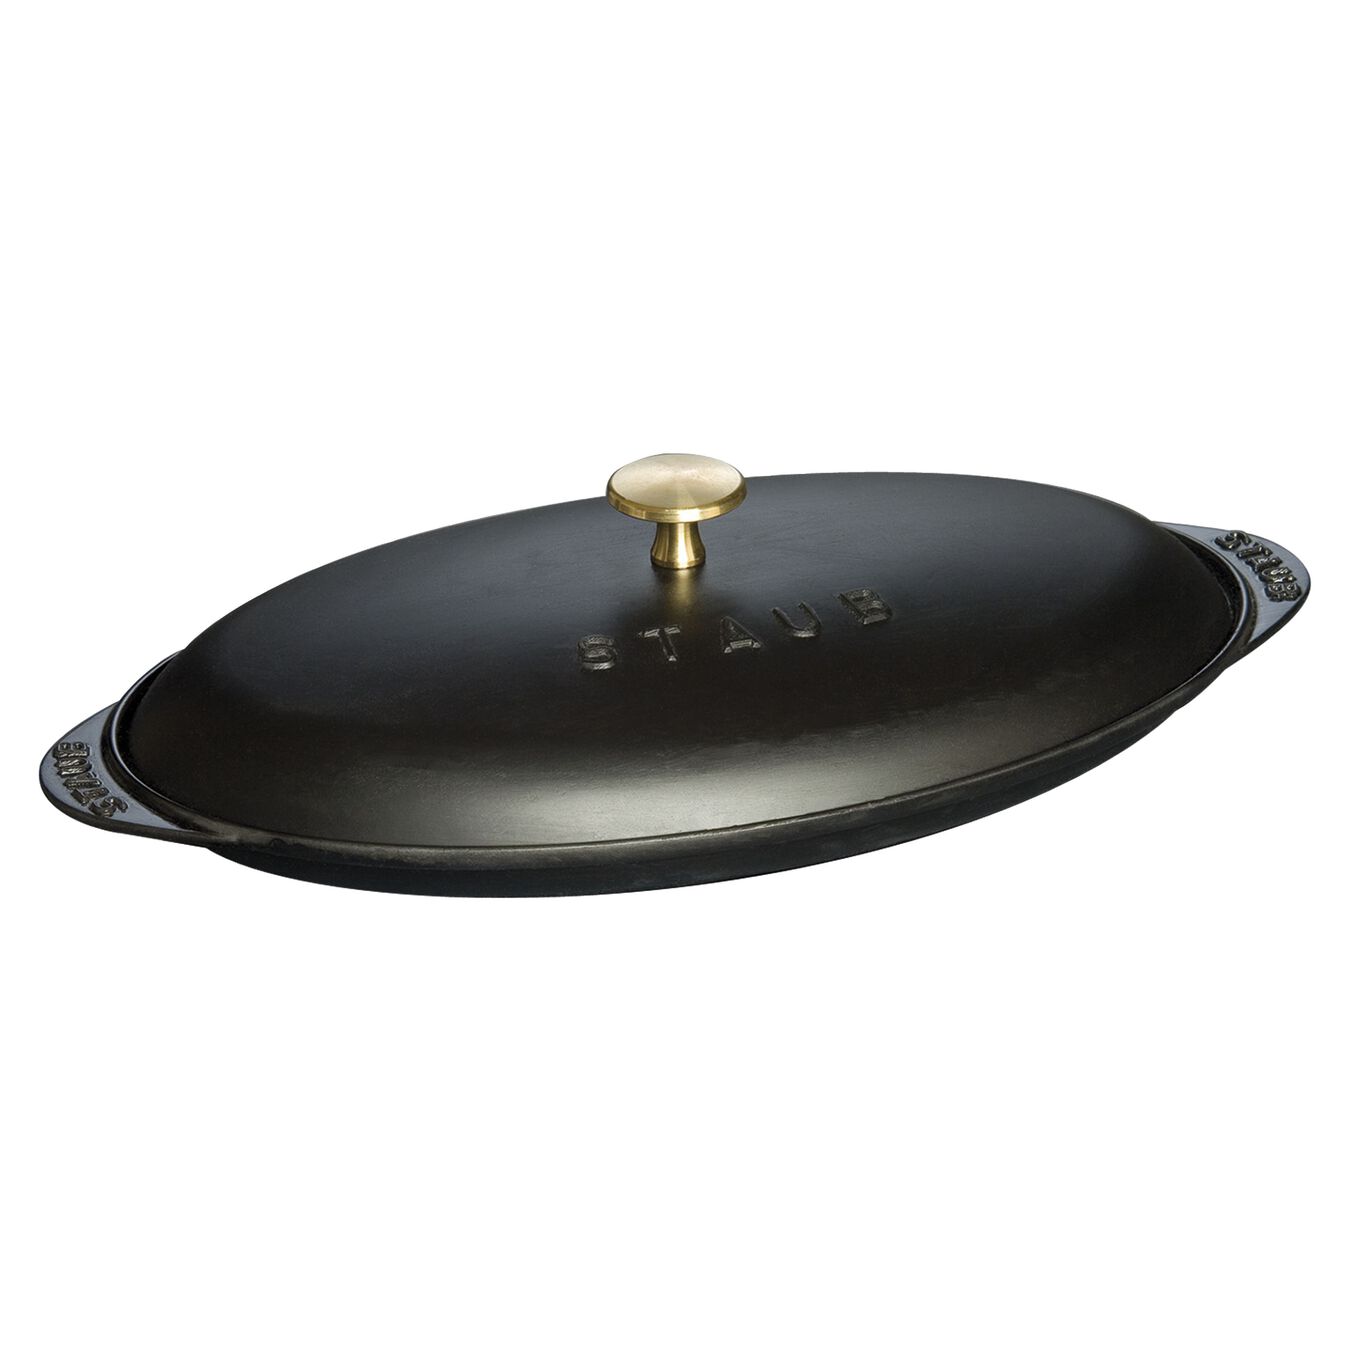  cast iron oval Oven dish with lid, black - Visual Imperfections,,large 2